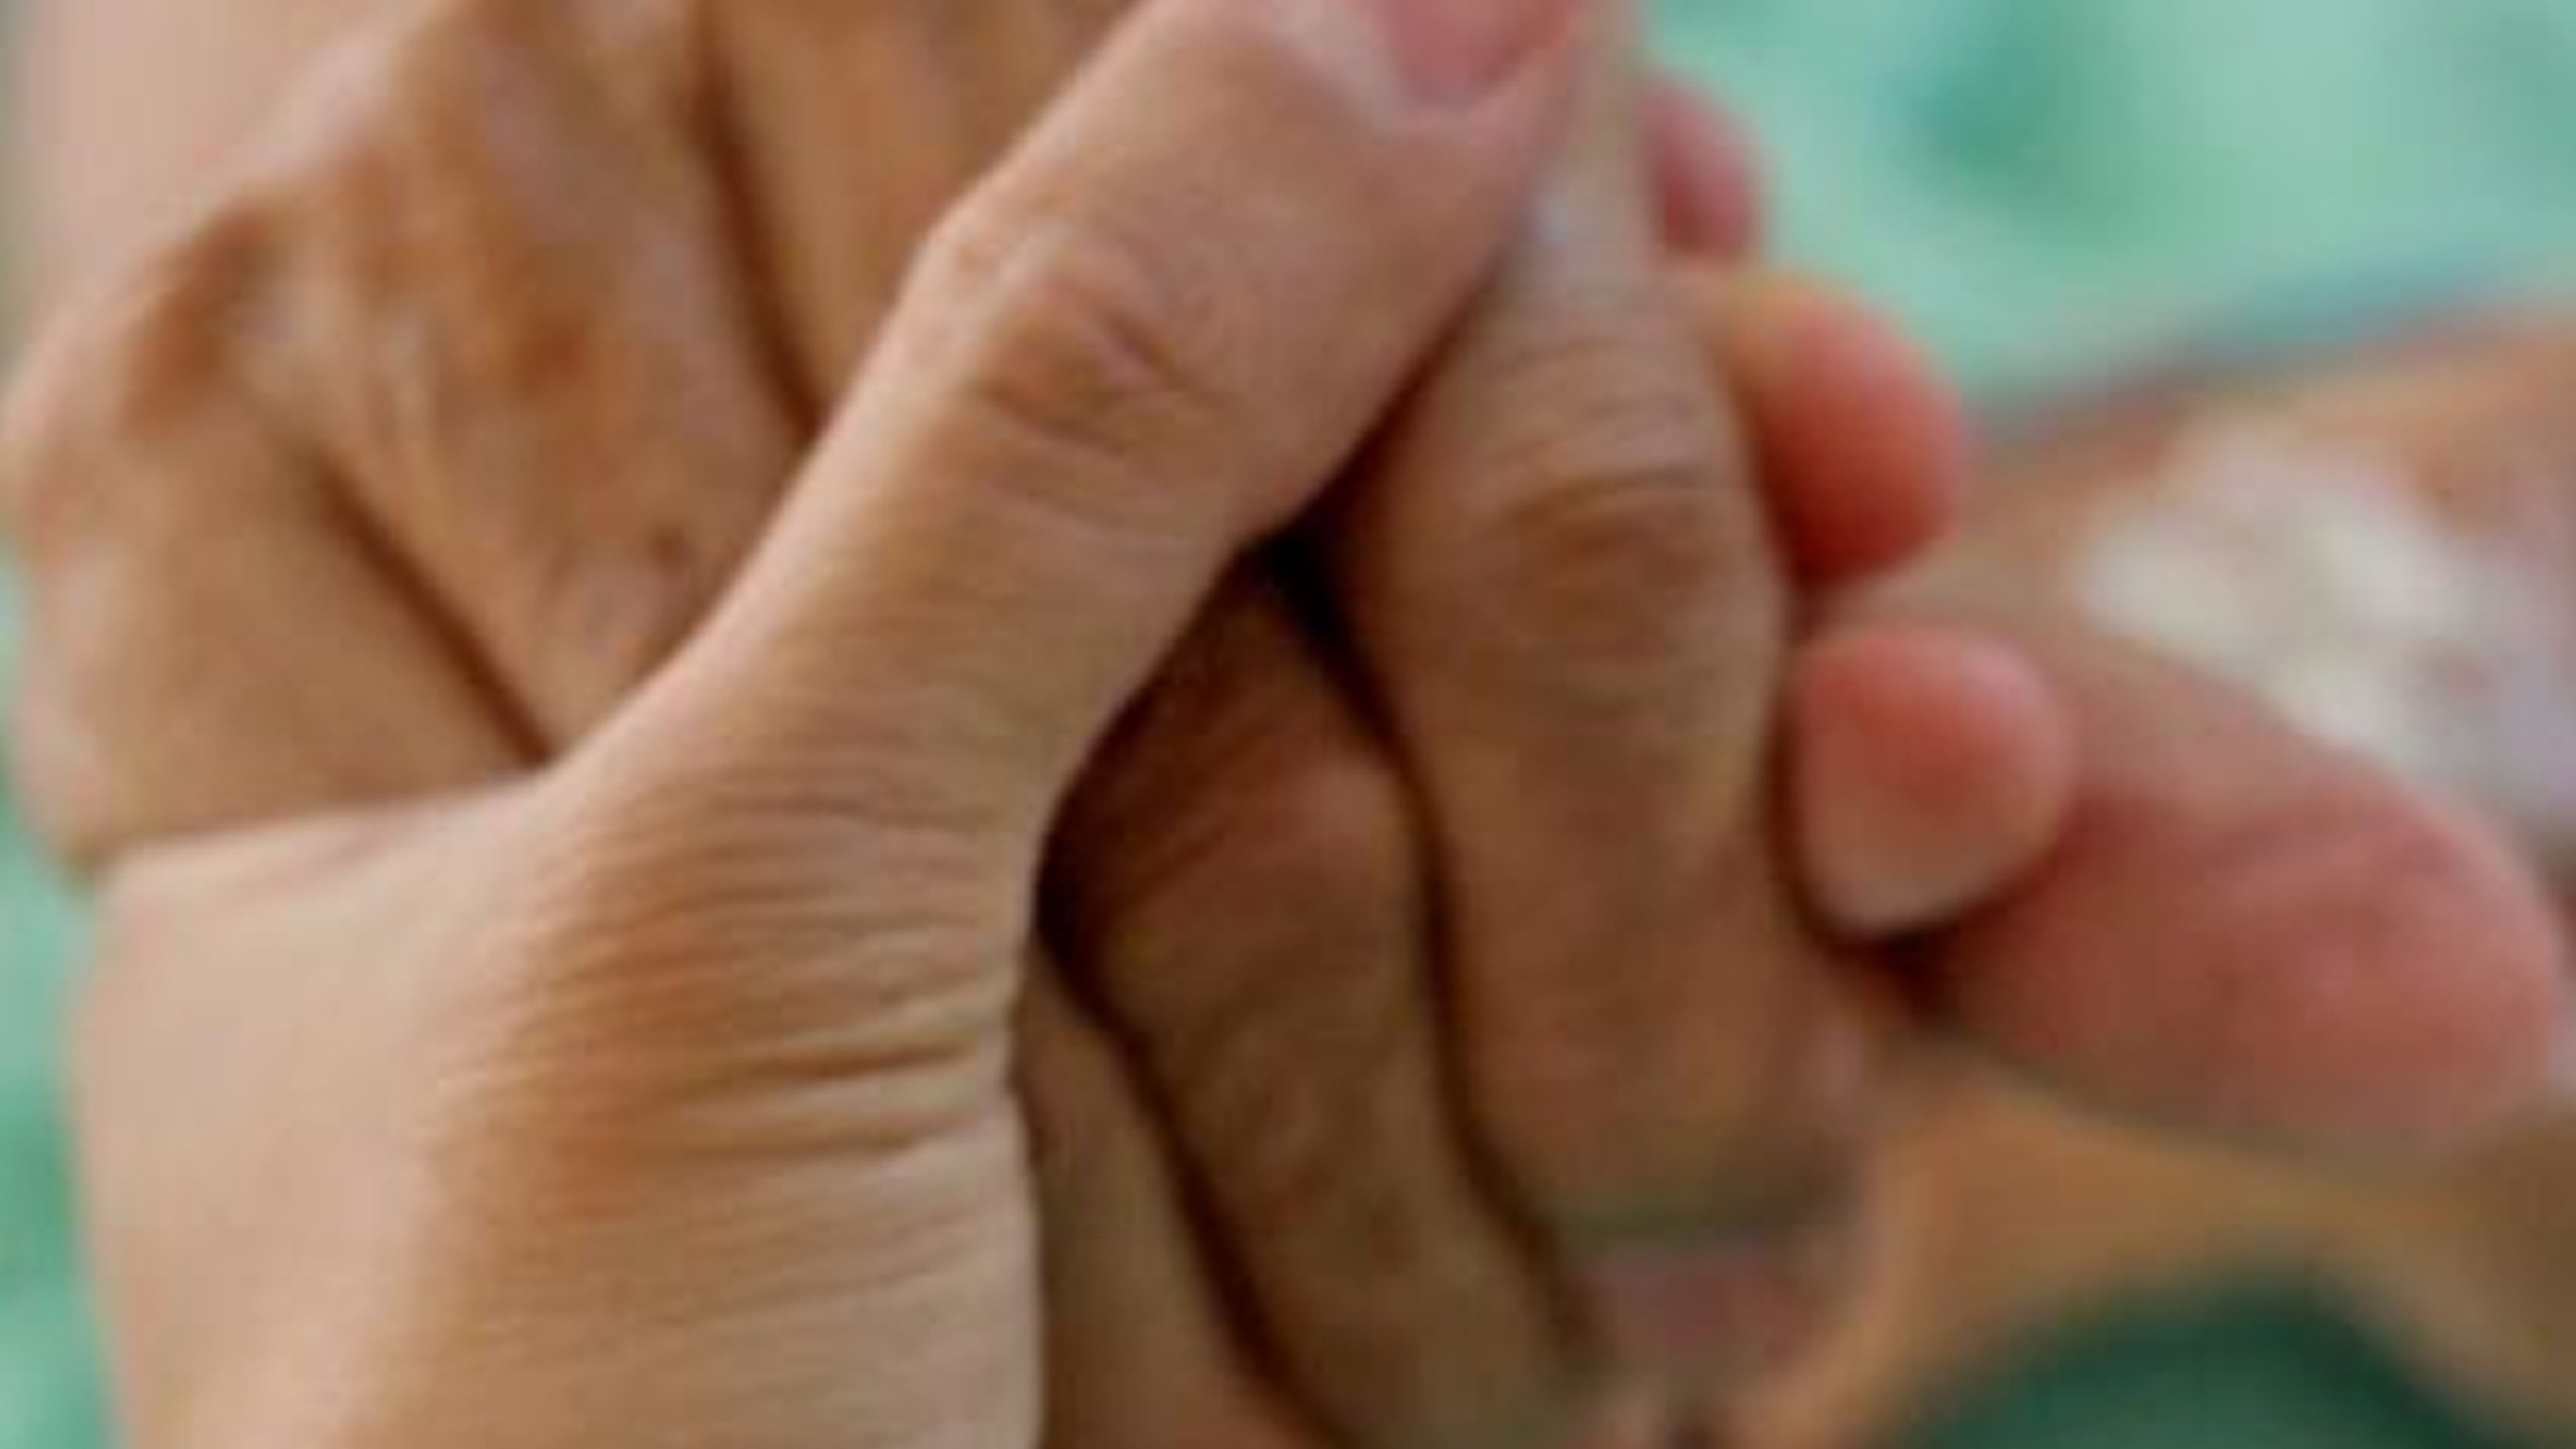 What Are The Burdens On The Alzheimer's Caregiver?